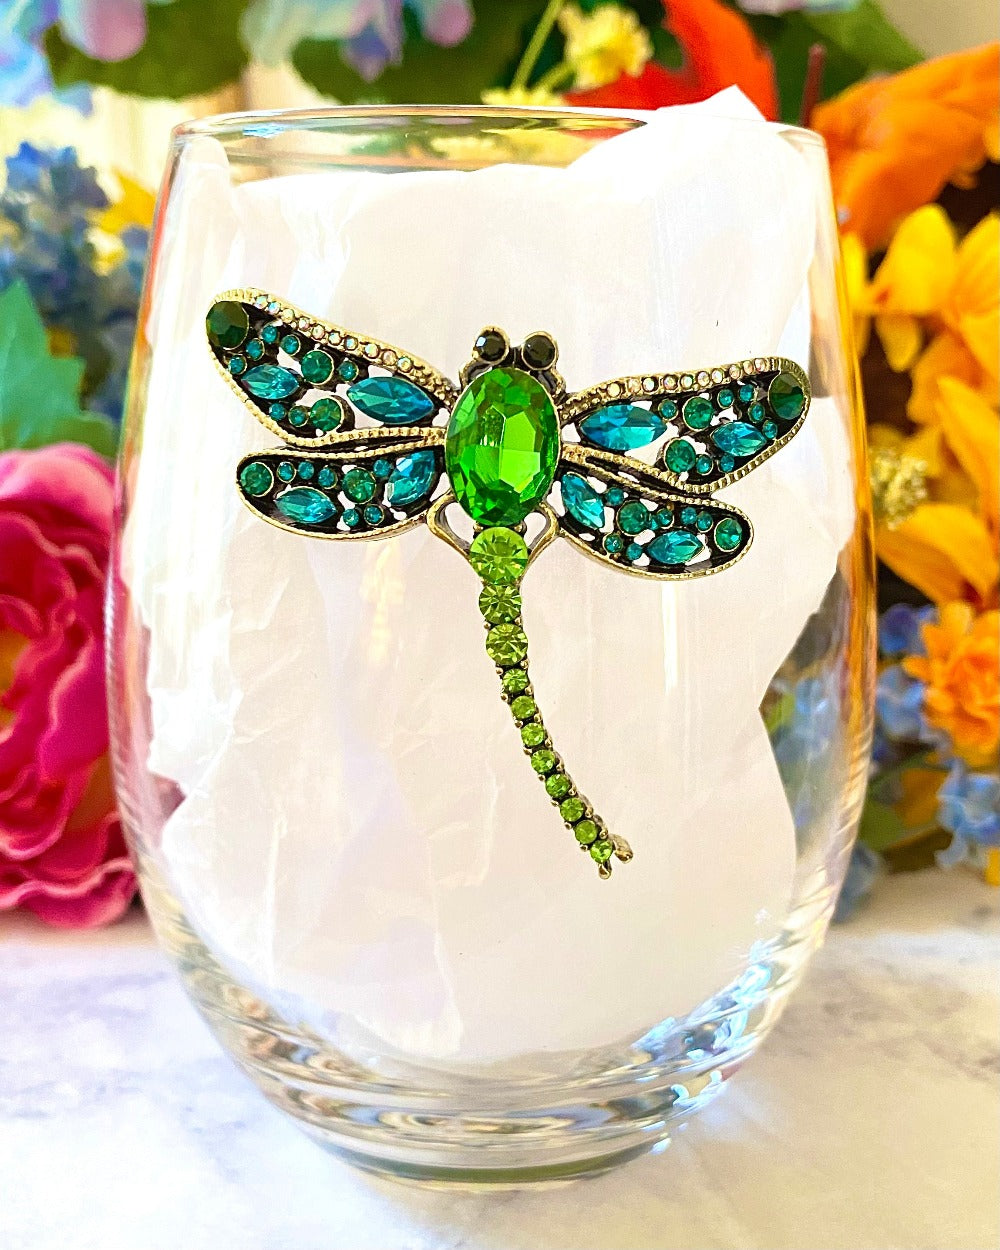 The Queens' Jewels Dragonfly Jeweled Glassware, Wine Glasses